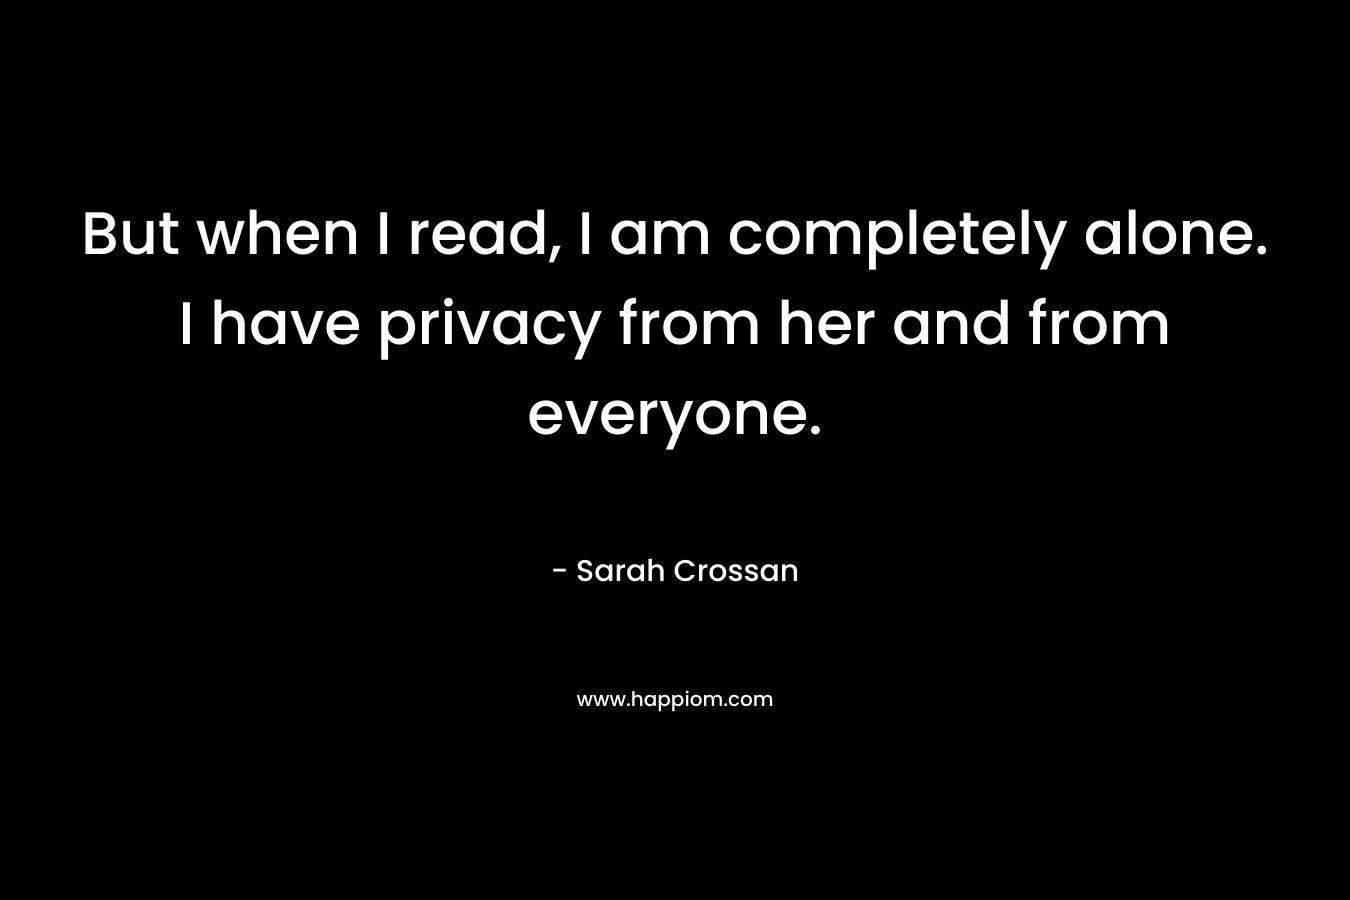 But when I read, I am completely alone. I have privacy from her and from everyone.